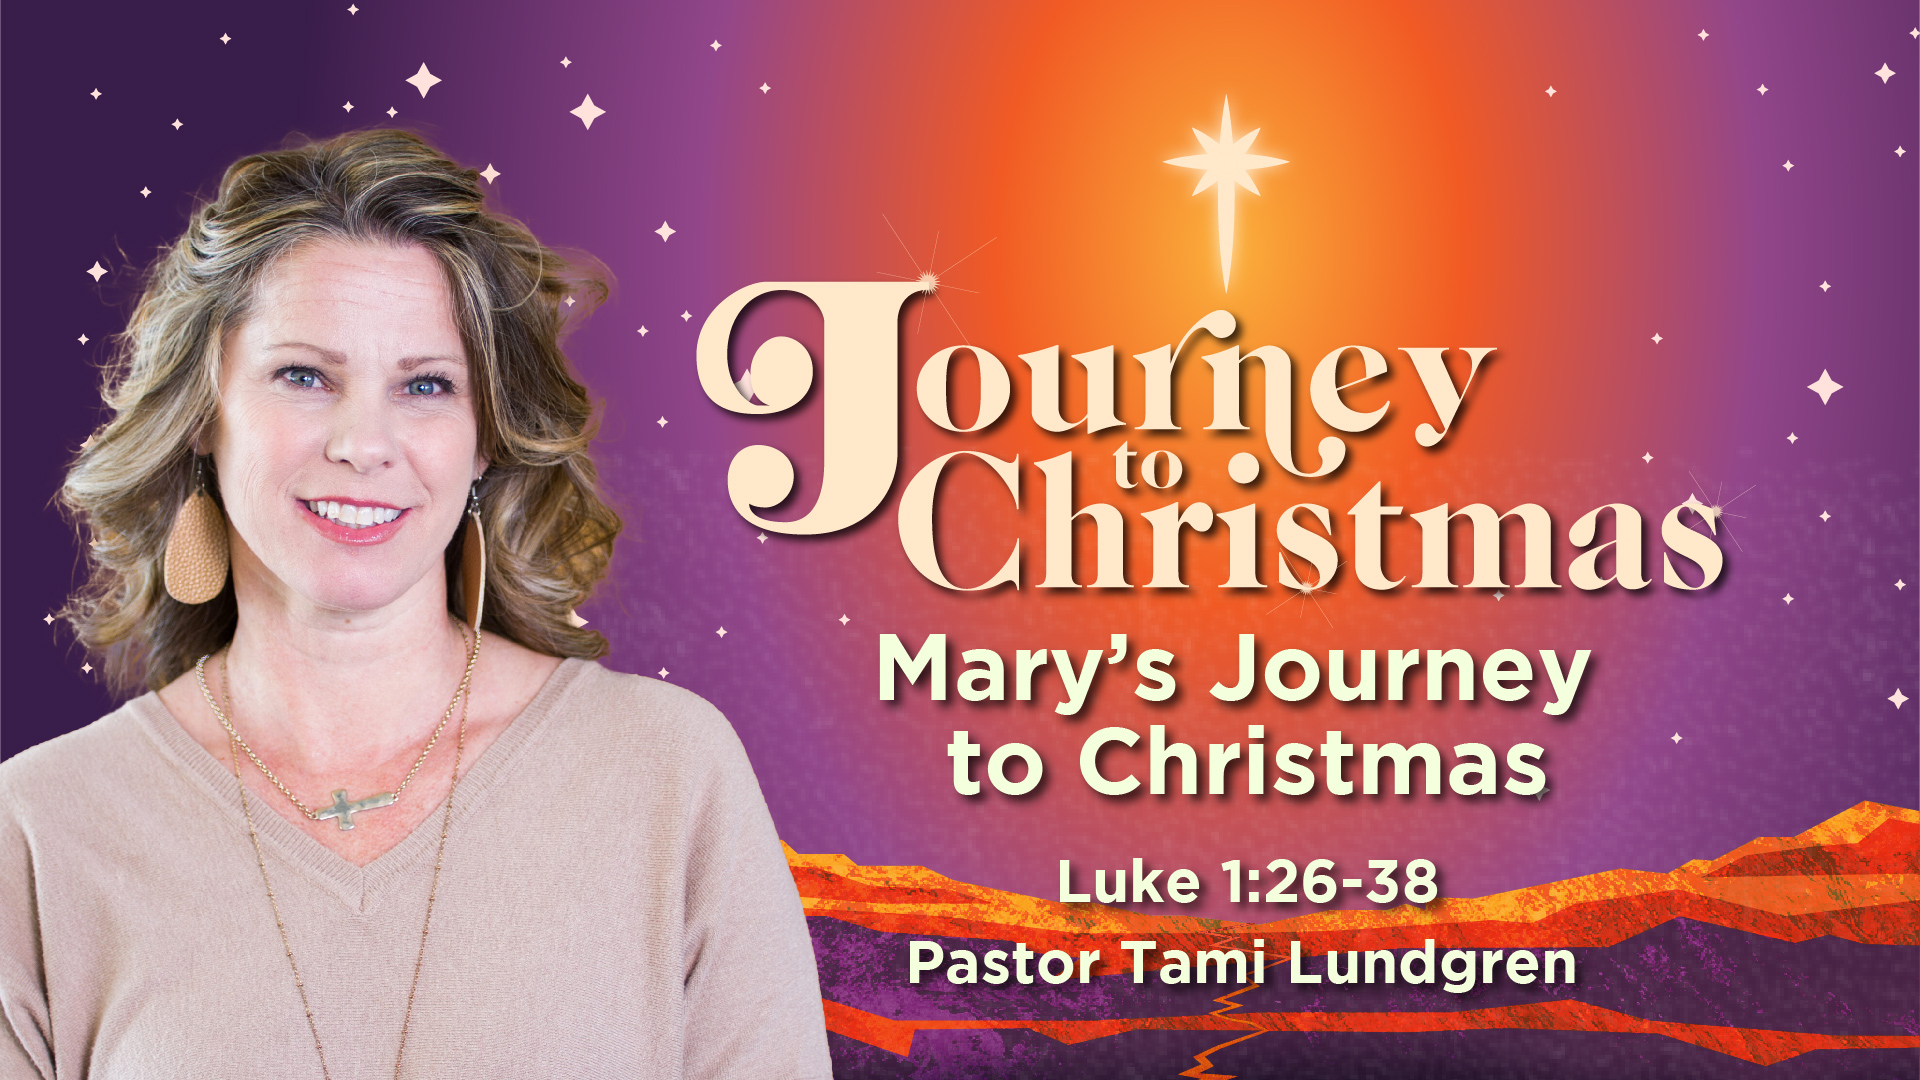 Mary’s Journey to Christmas